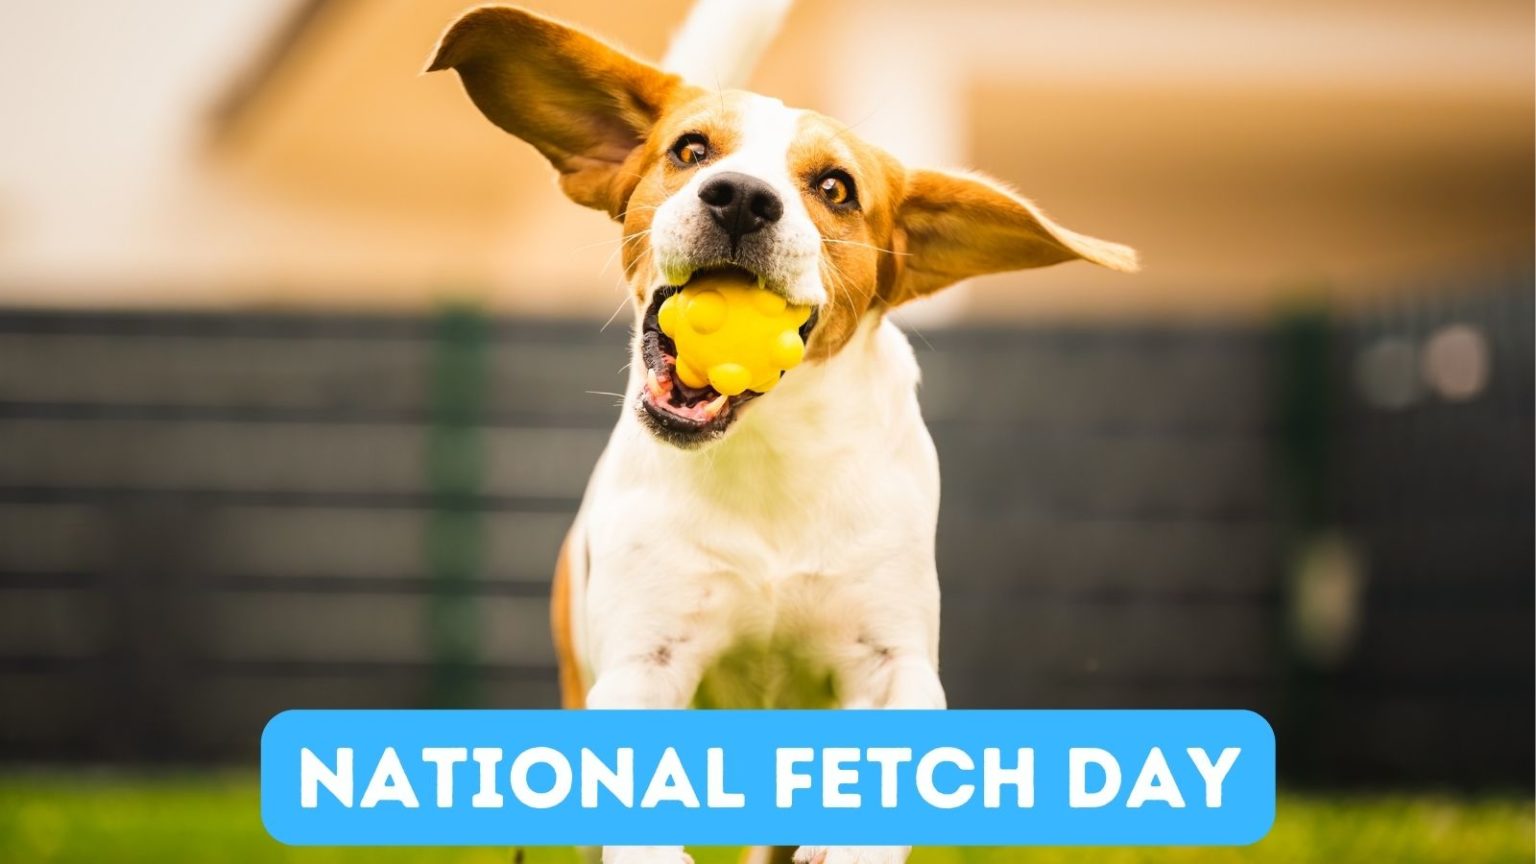 Are You Ready for National Fetch Day?